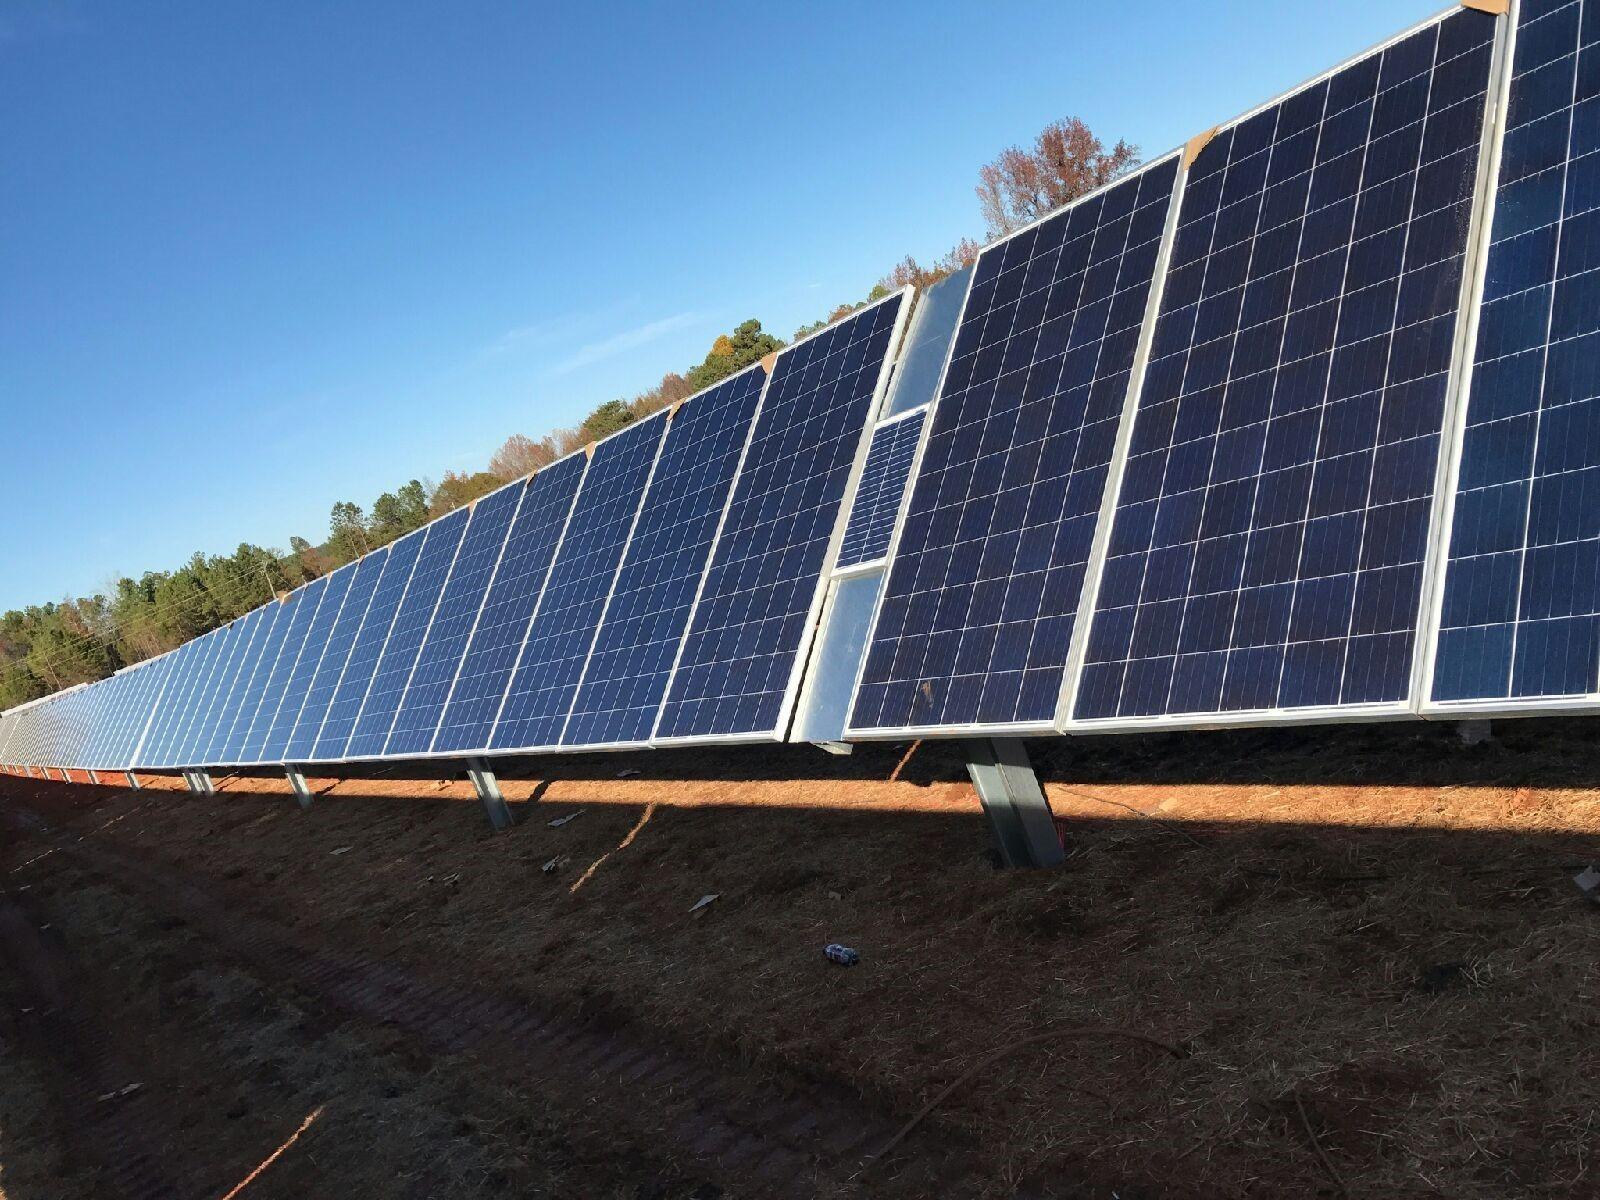 Headquartered in Austin, TX, HCS Renewable Energy is the fastest growing solar subcontractor within staffing - focused 100% on utility scale, ground-mount solar projects.